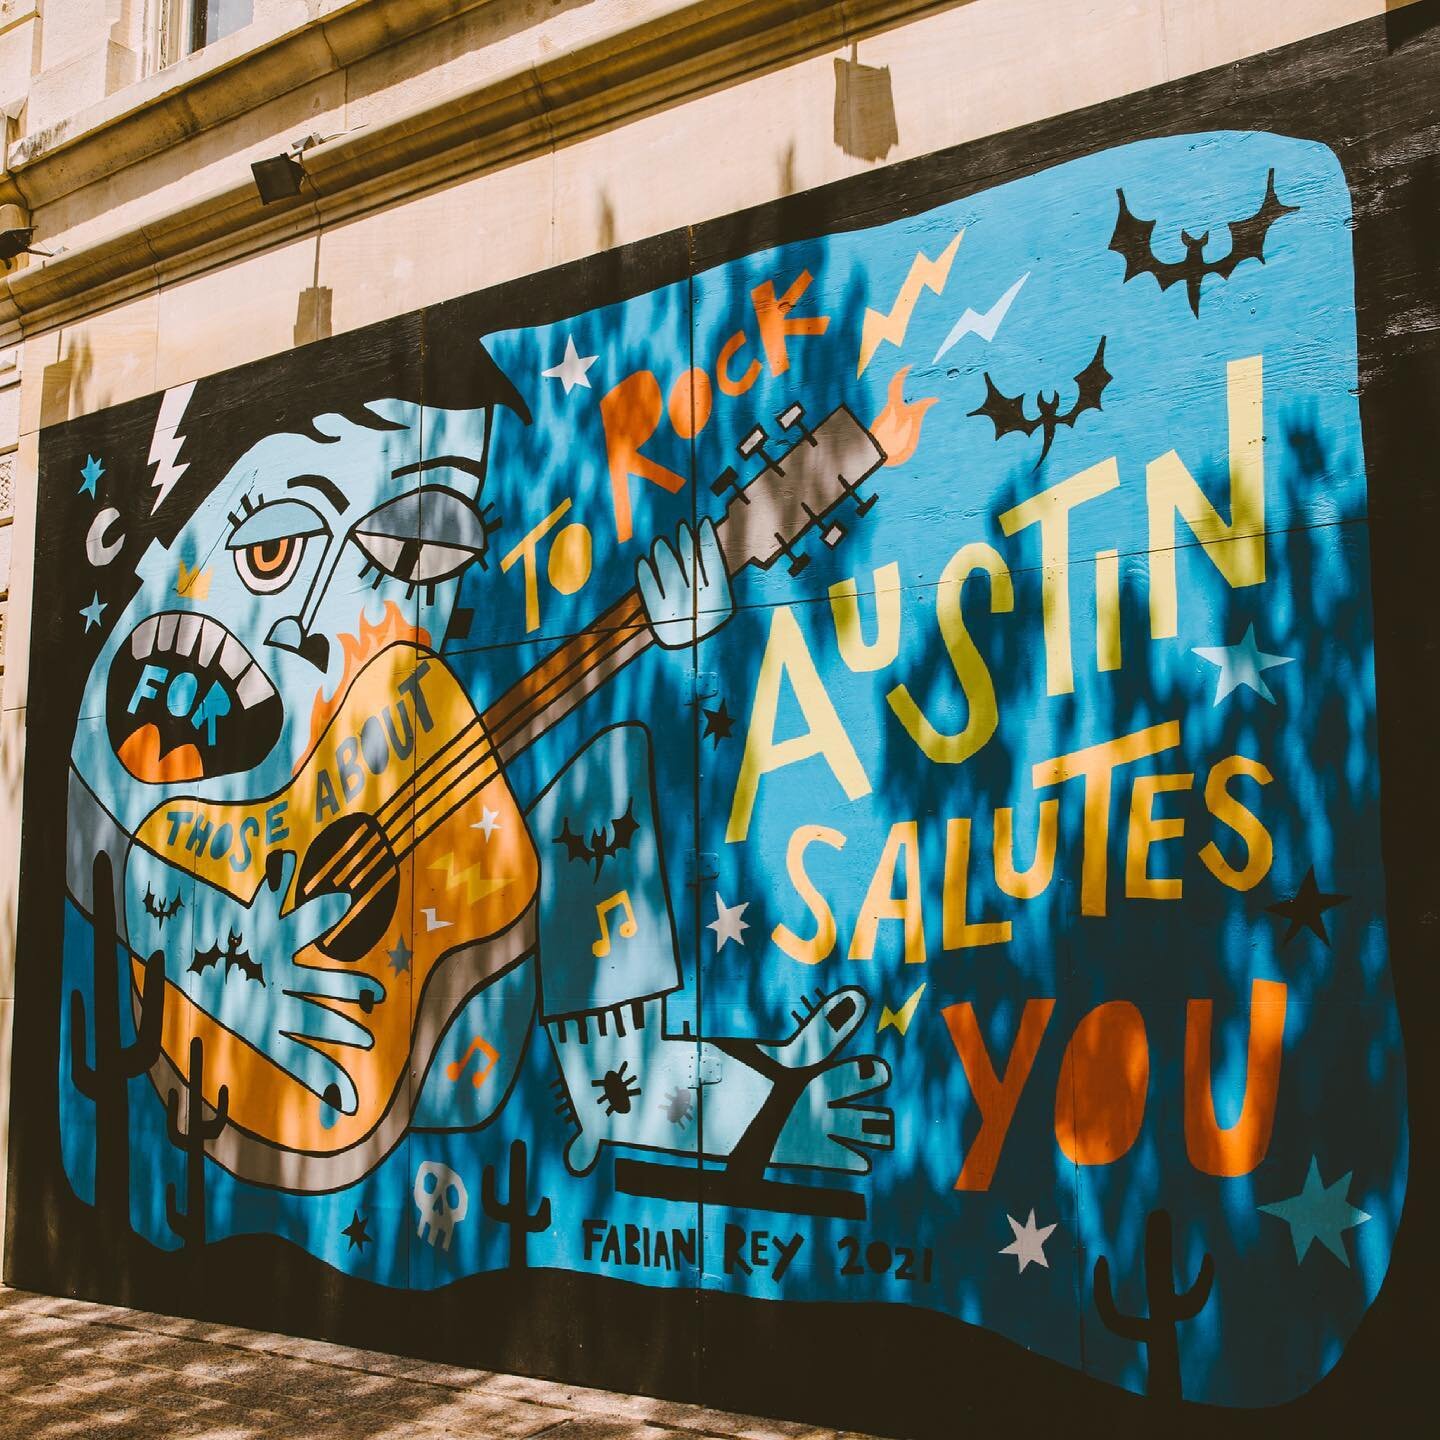 Austin was Awesome. Thanks for the memories @coopersbbqatx @flexas_state_capitol @residenceinn @marriottbonvoy @marriotthotels